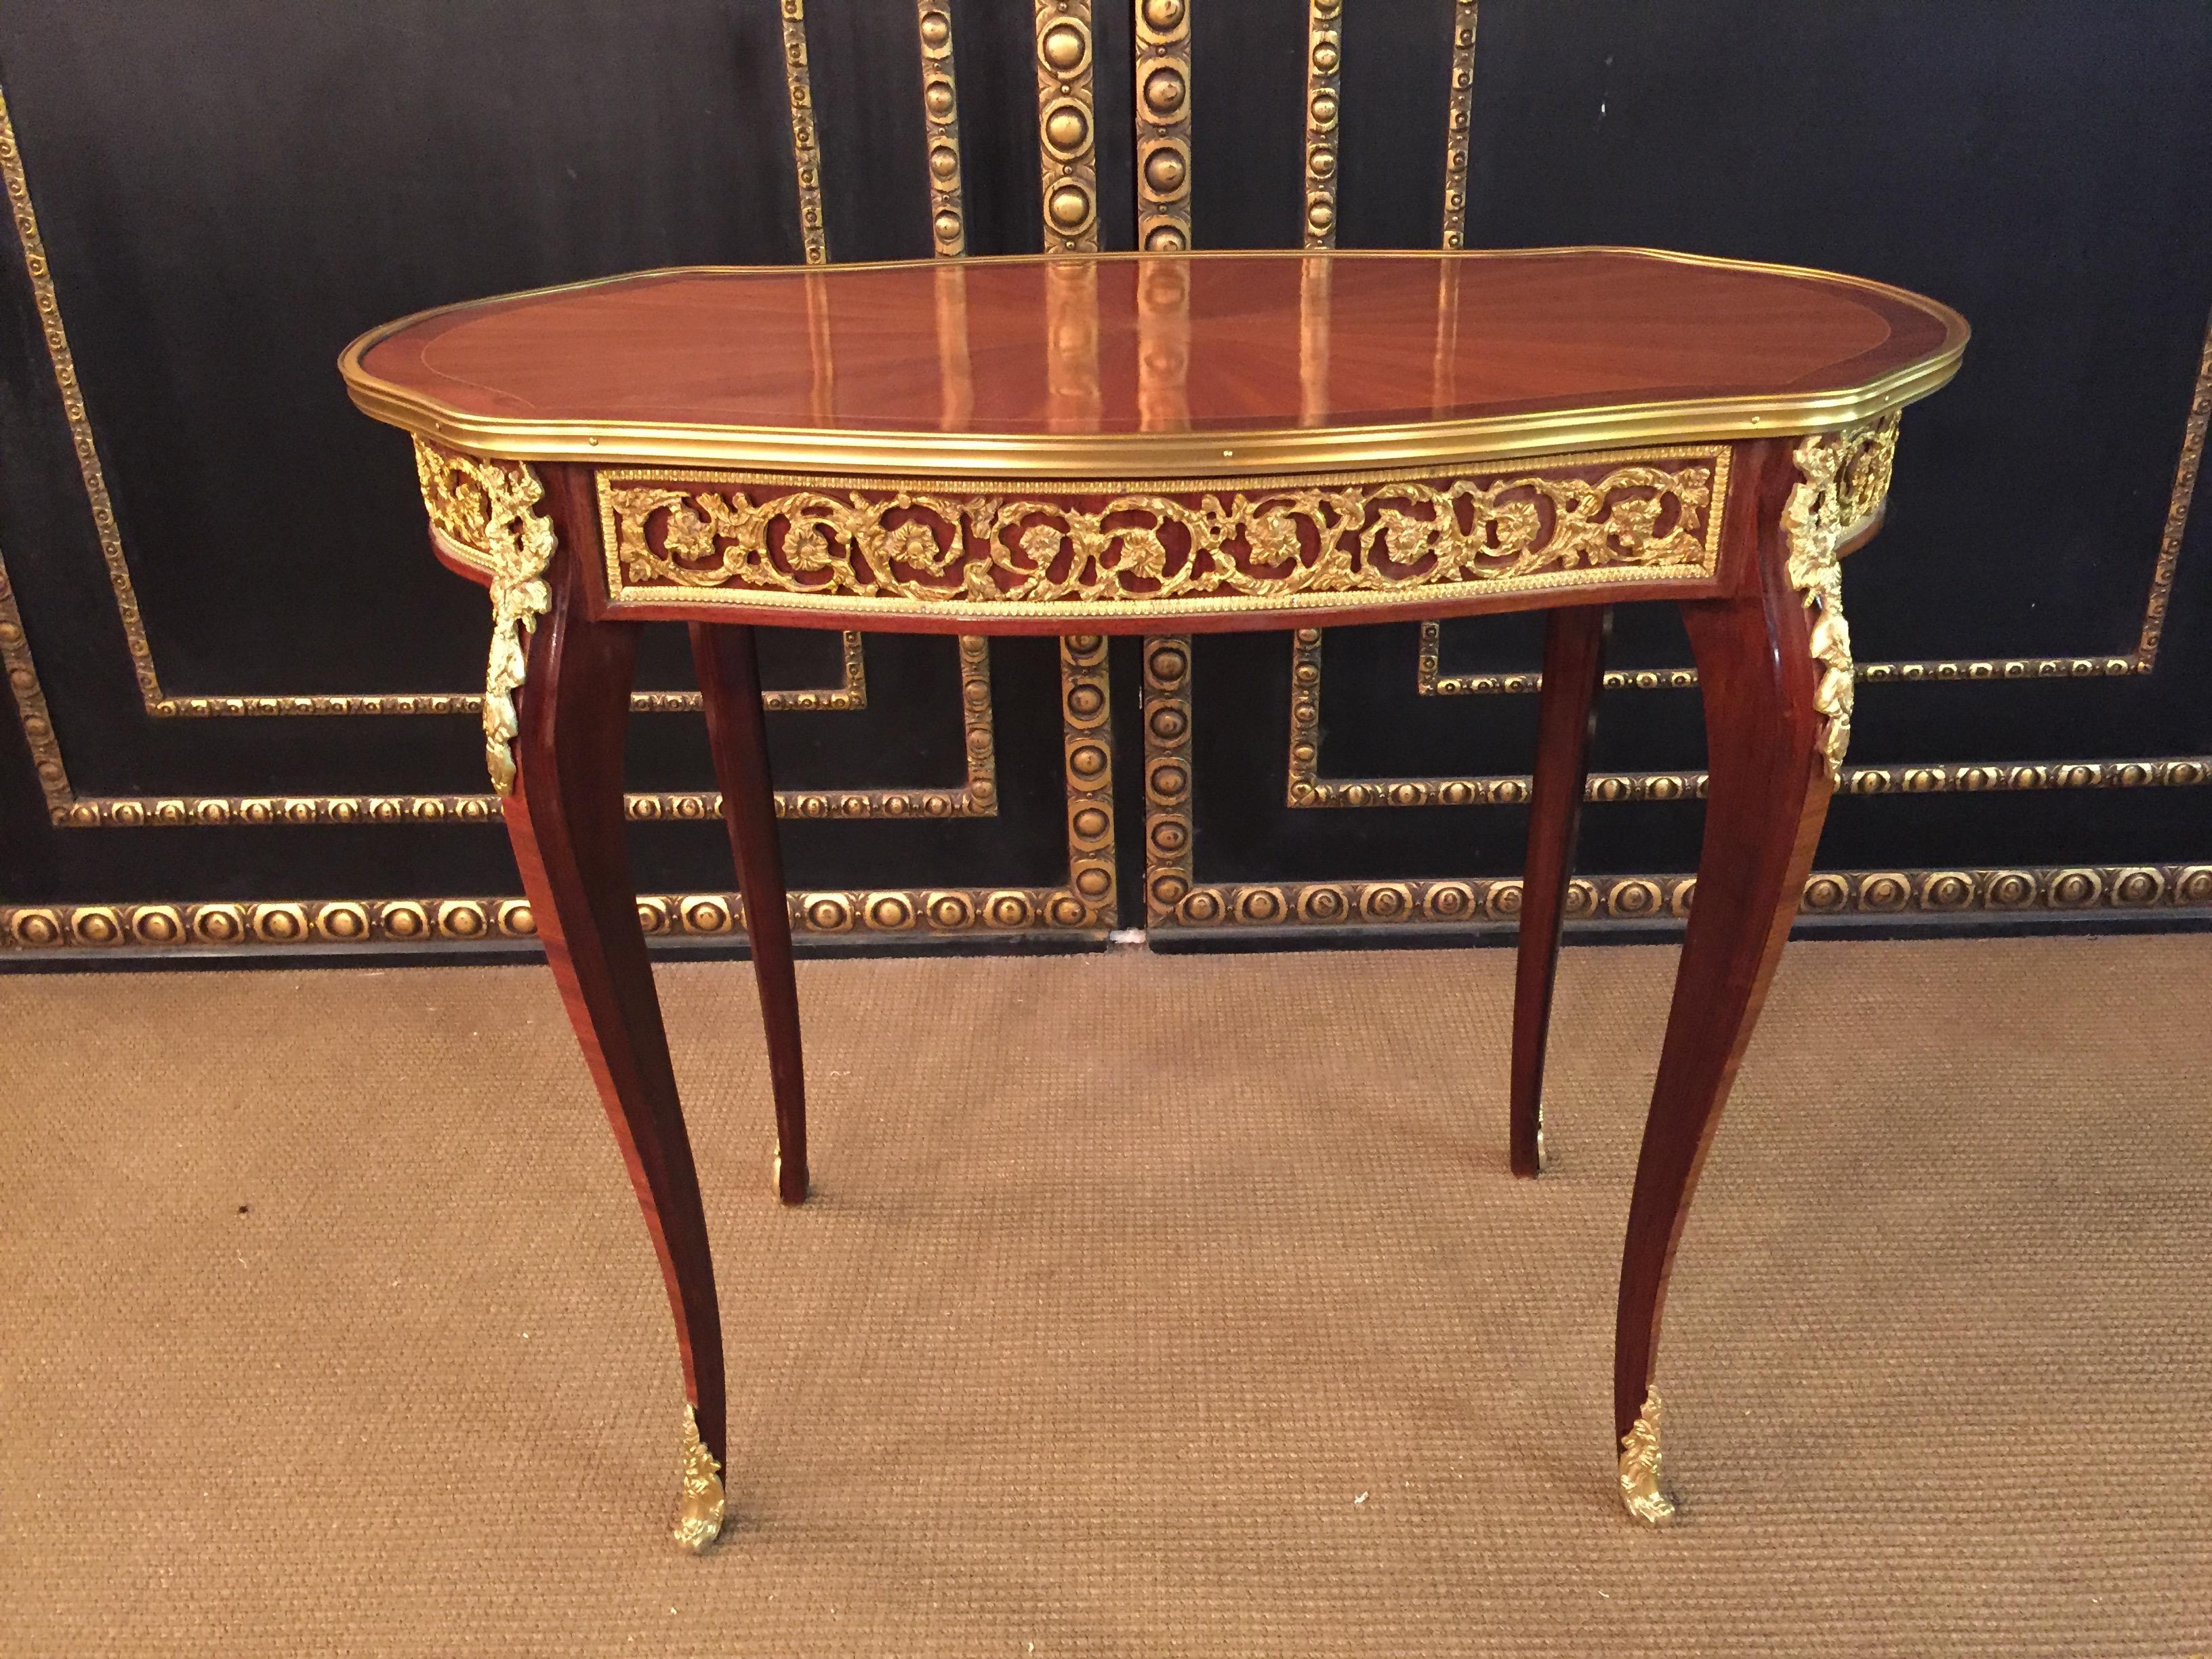 Louis XV Unique French Salon Table in Transition Style, Rosewood Veneer on Beech